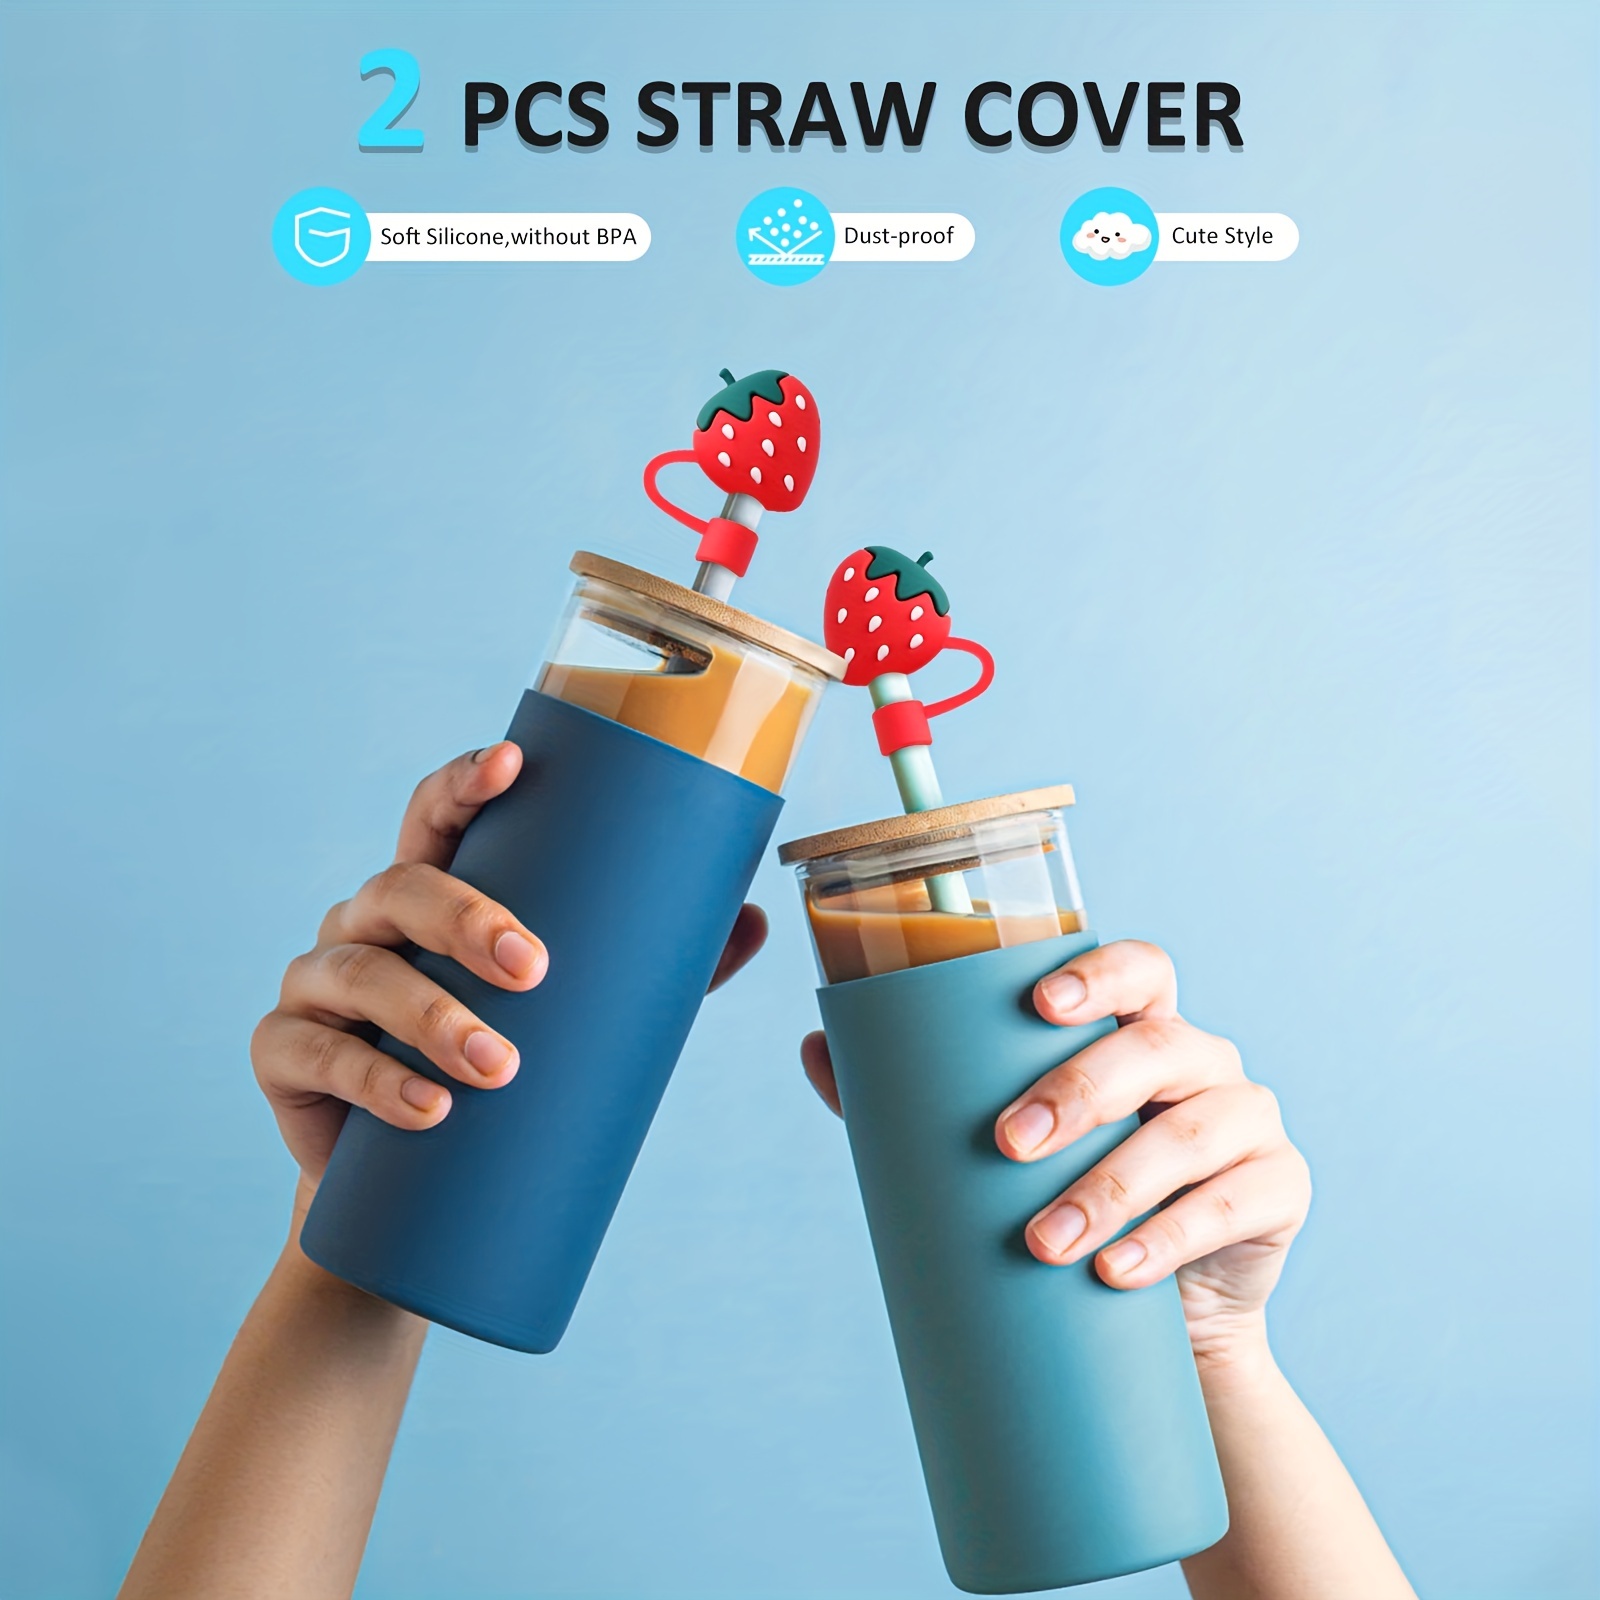 2pcs Straw Tips Cover Straw Covers Cap For Reusable Straws Straw Protector  a